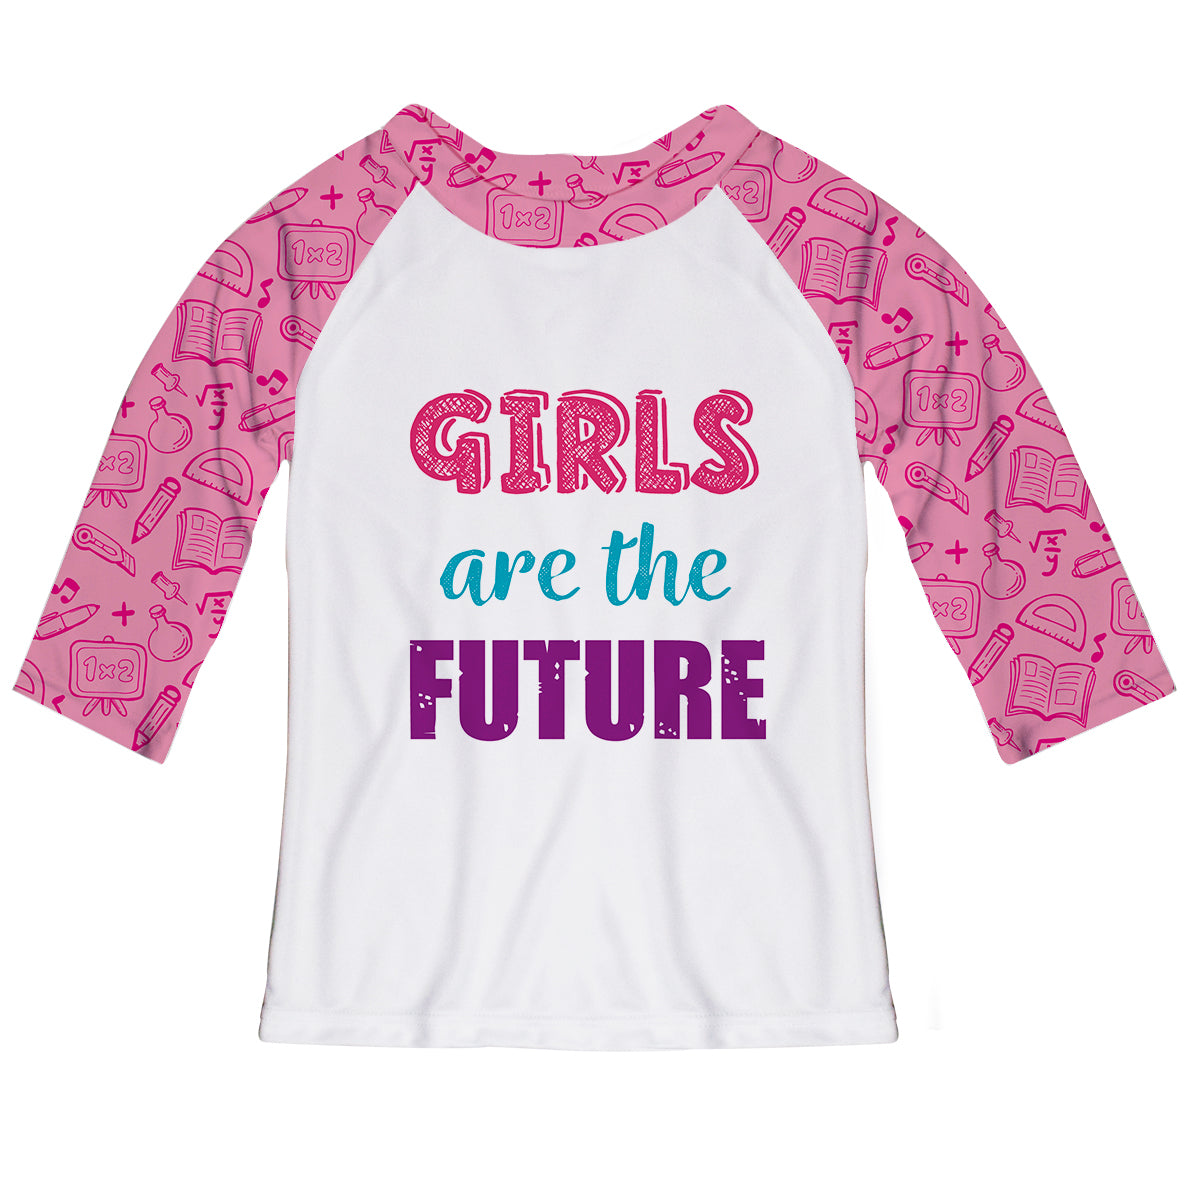 Girls Are The Future White And Pink Raglan Tee Shirt - Wimziy&Co.